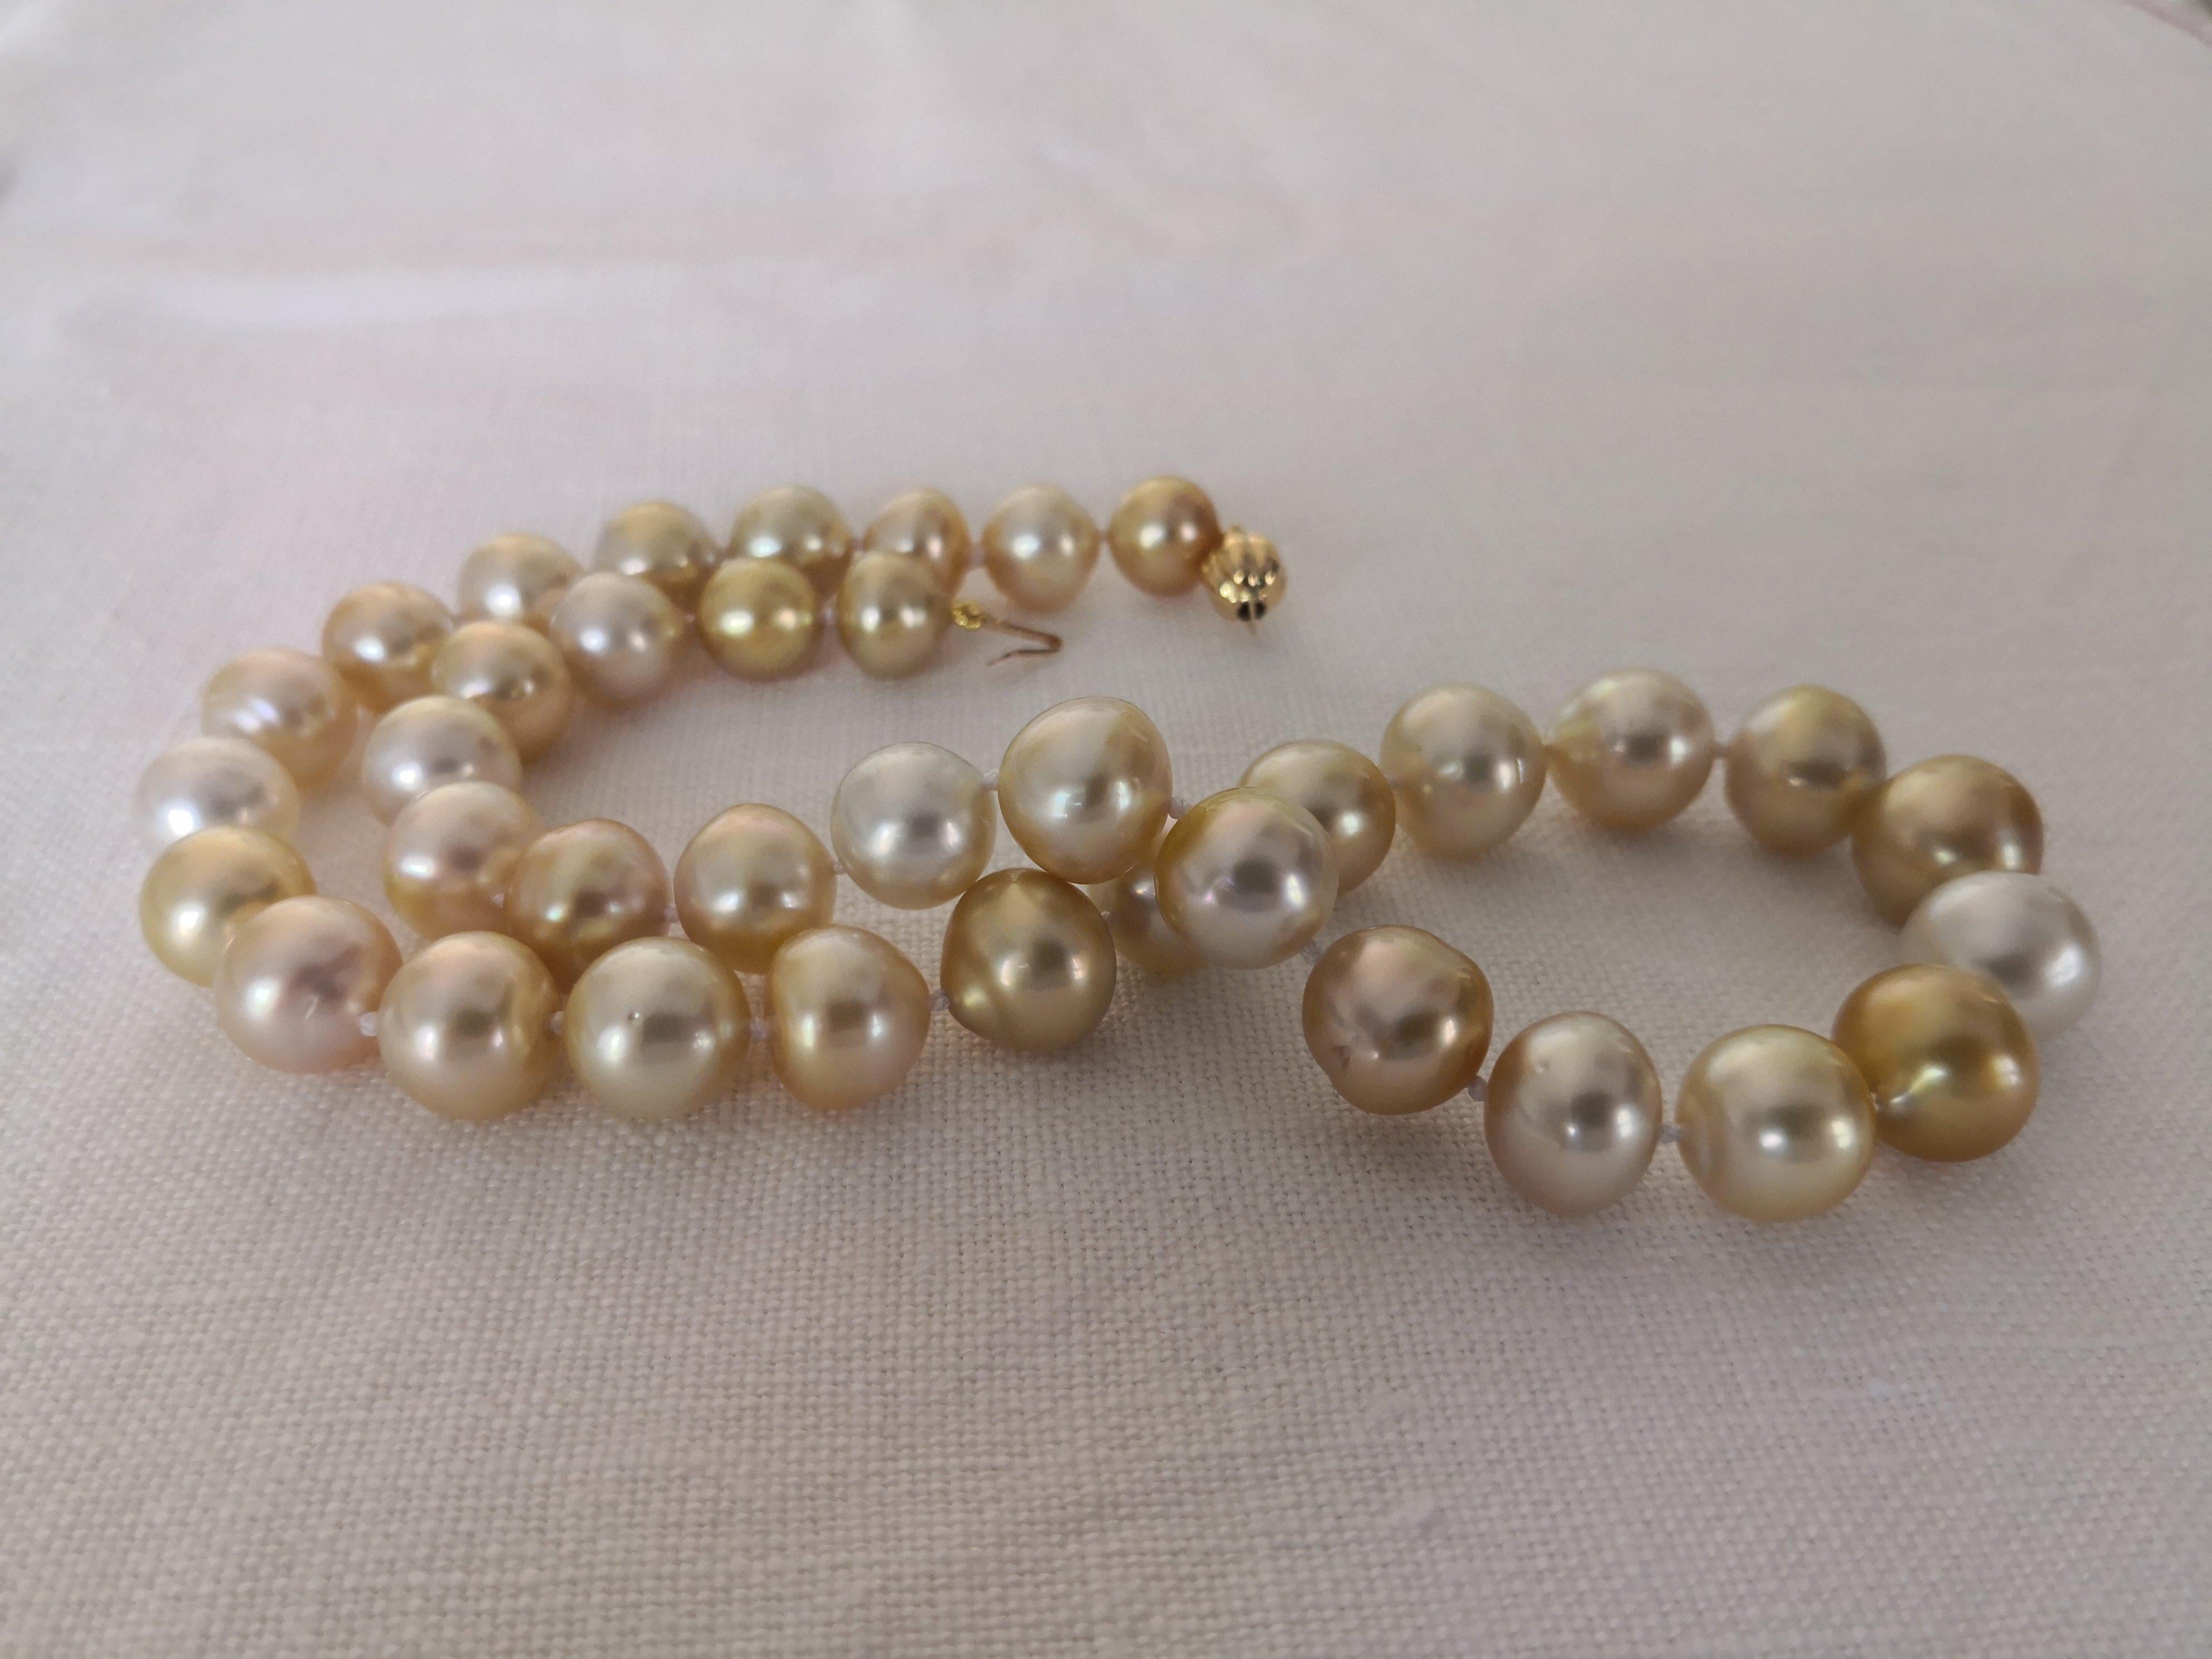 A Natural Color South Sea Pearls necklace

- Size of Pearls 10-13  mm of diameter

- Pearls from Pinctada Maxima Oyster

- Origin: Indonesia ocean waters

-  Natural Colors Golden  pearls

-  High Natural luster and Orient

-  Pearls of semi-round